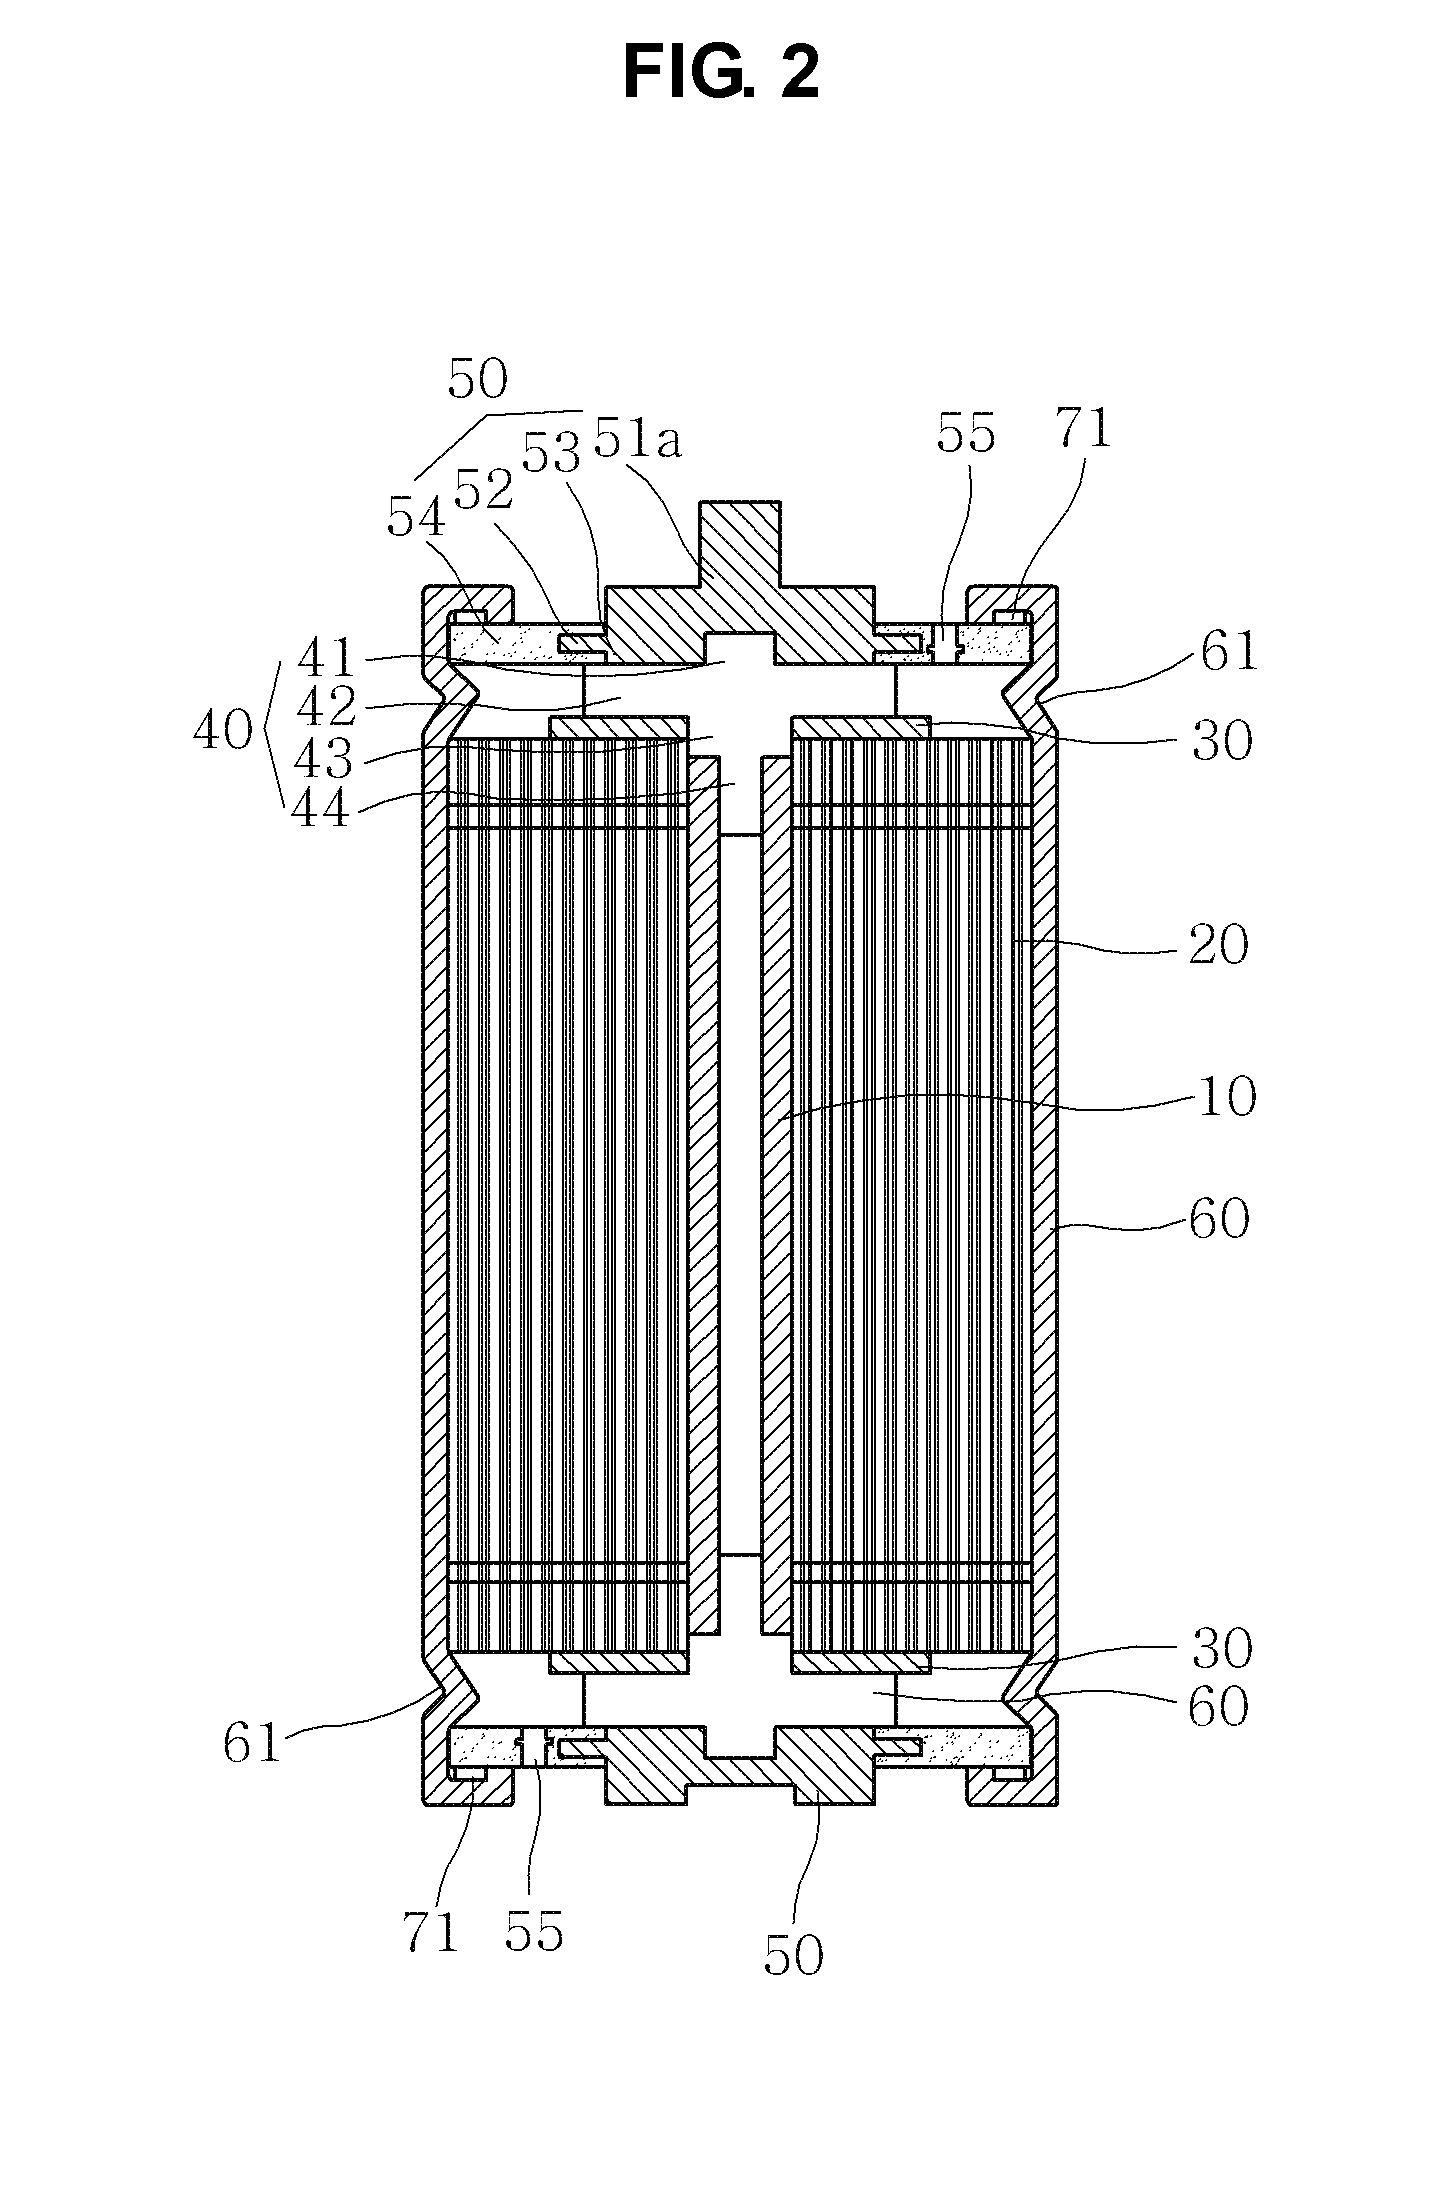 Super capacitor for high power